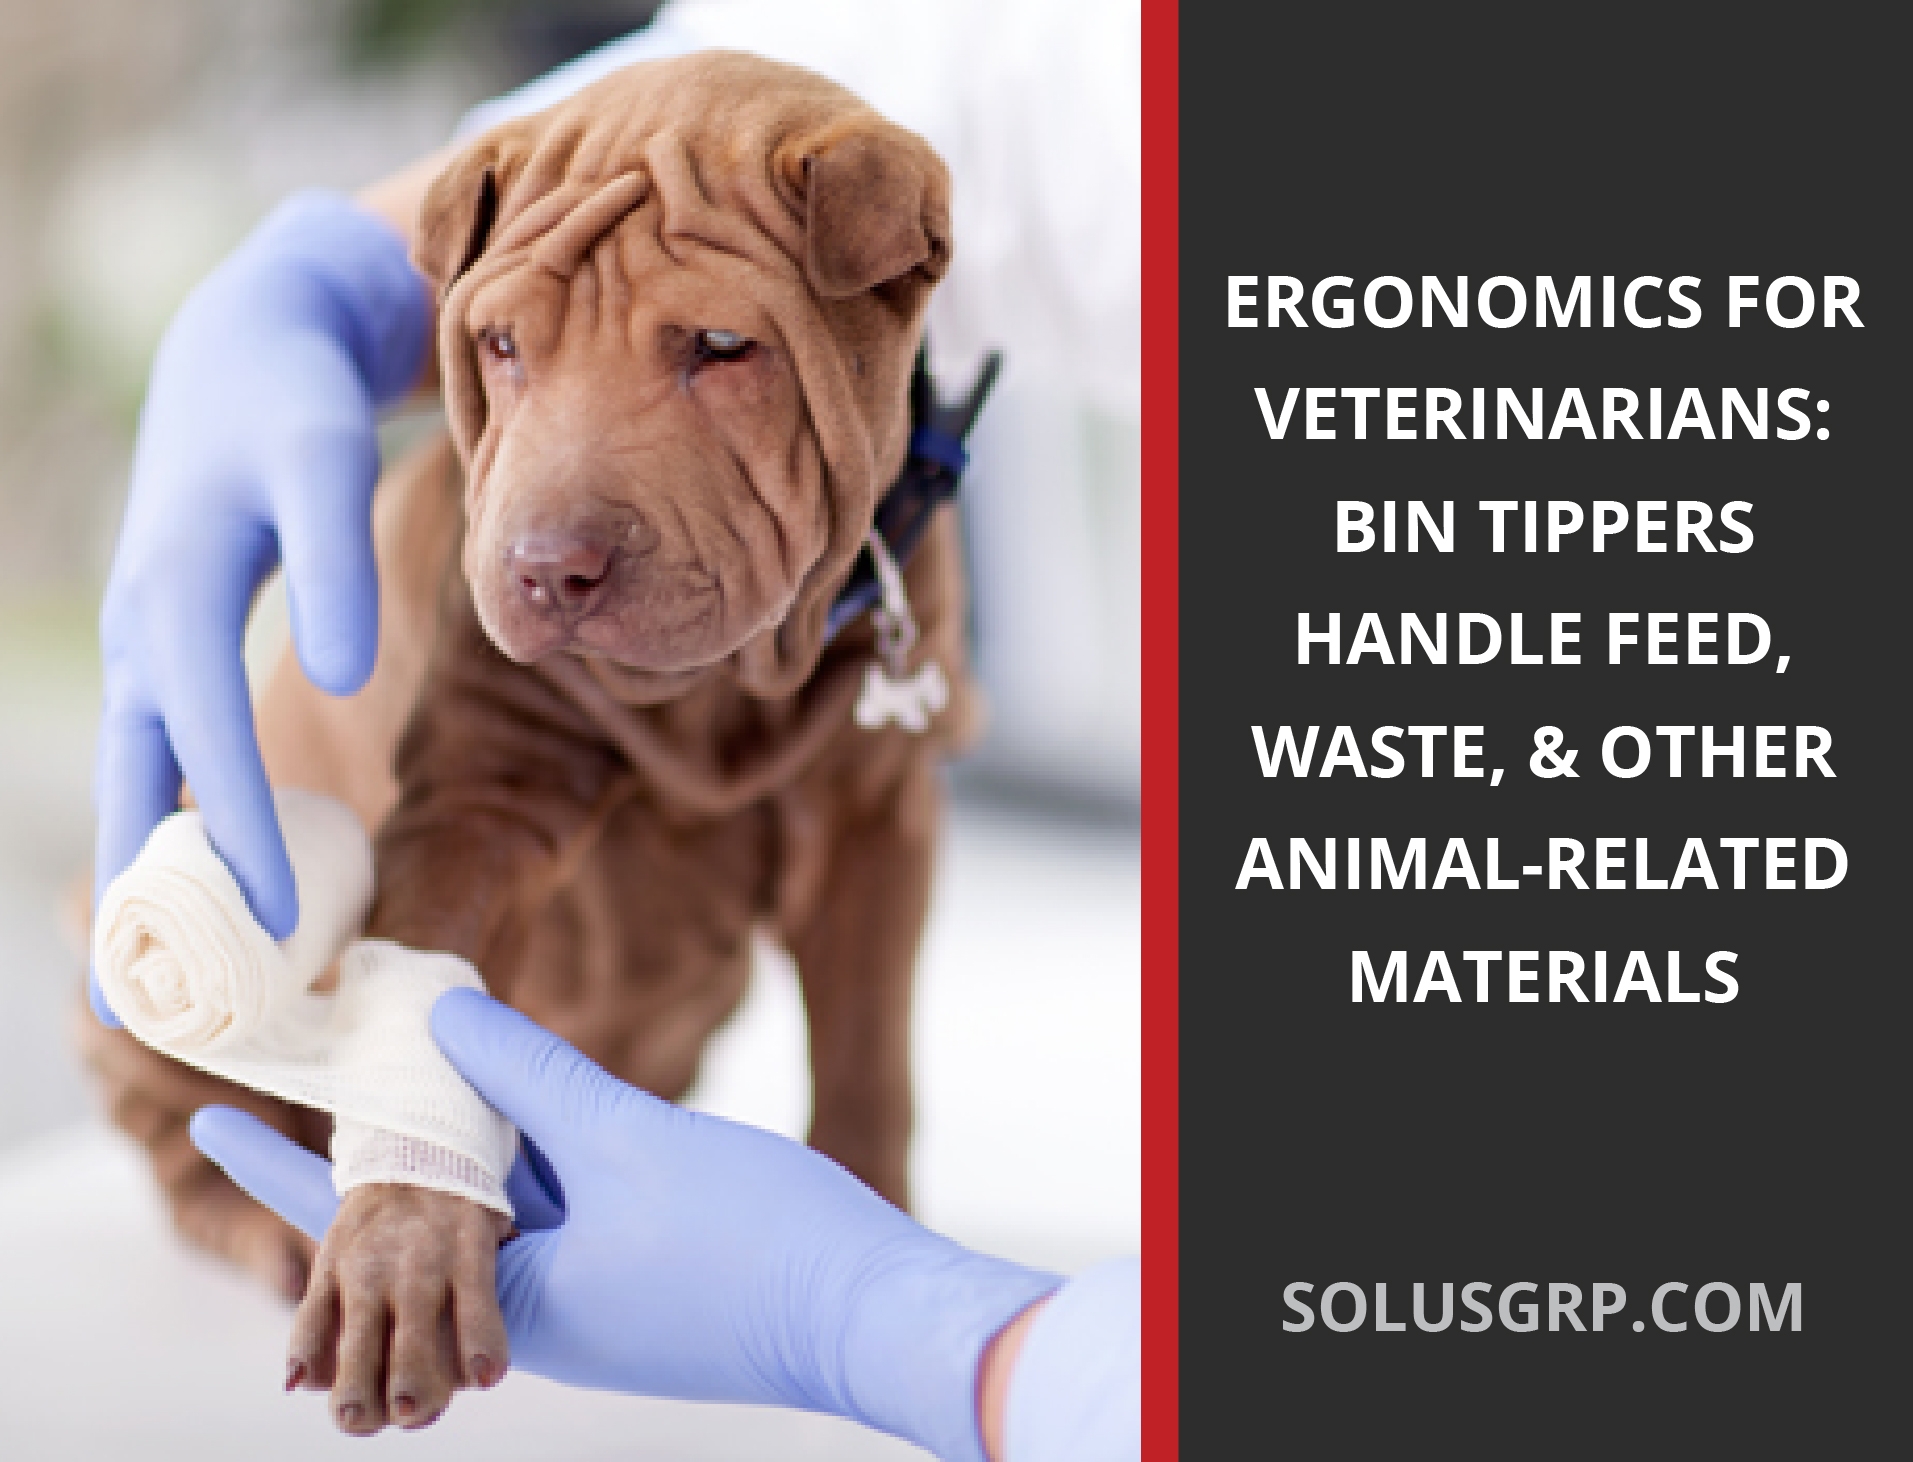 Bin Dumpers can be used by Veterinarians for feed, waste, and other animal-related materials